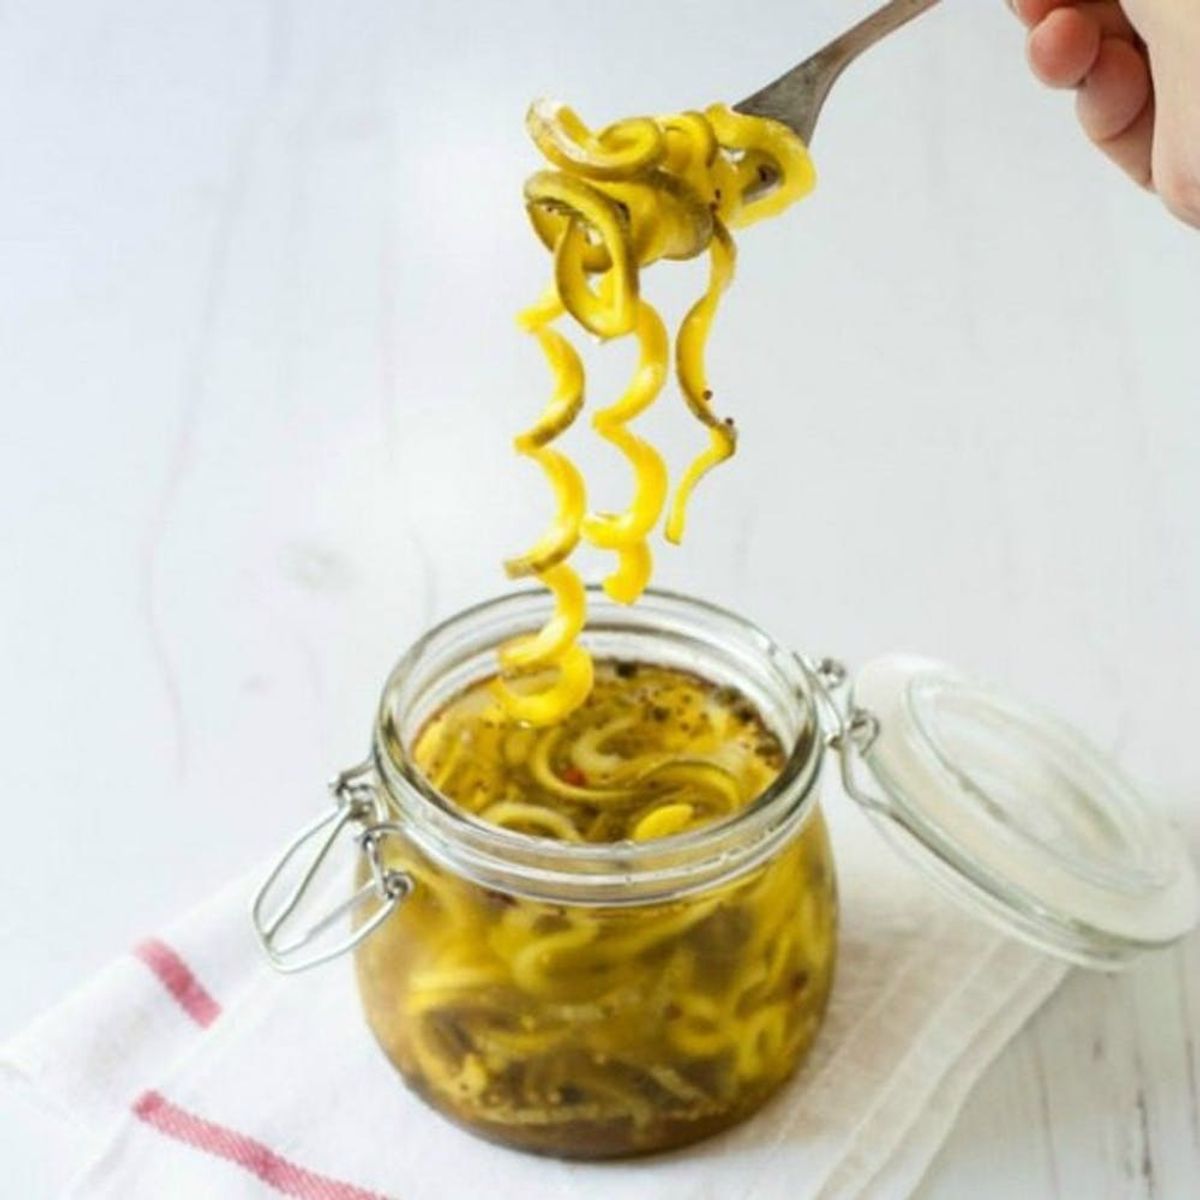 No Time for Canning? These 17 Quick Pickle Recipes Have You Covered